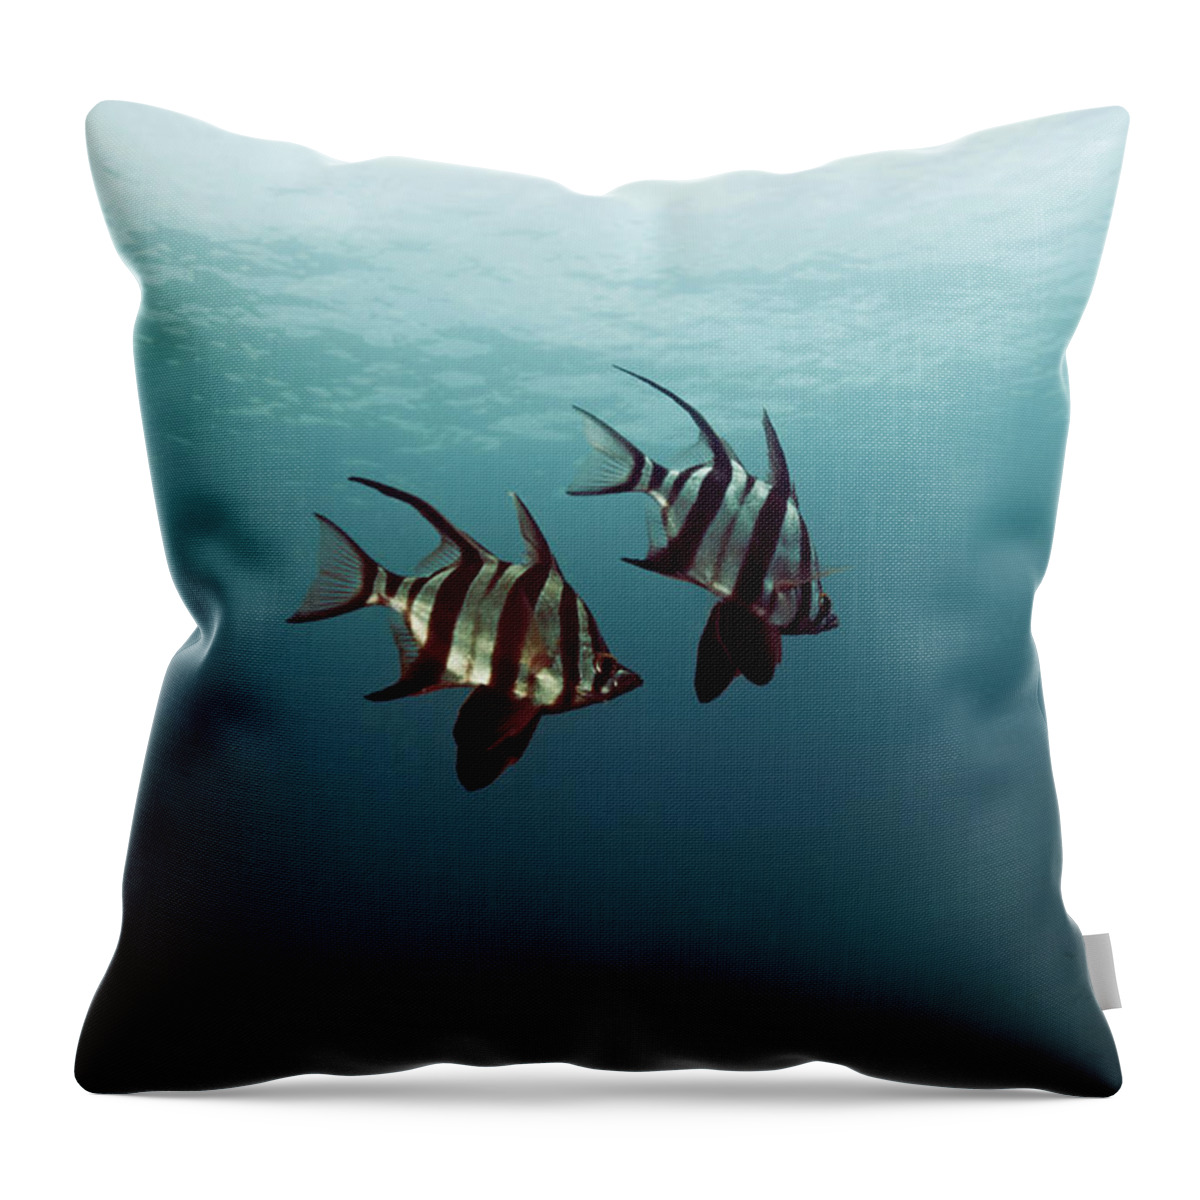 Underwater Throw Pillow featuring the photograph Couple Of Fish by Underwater Graphics